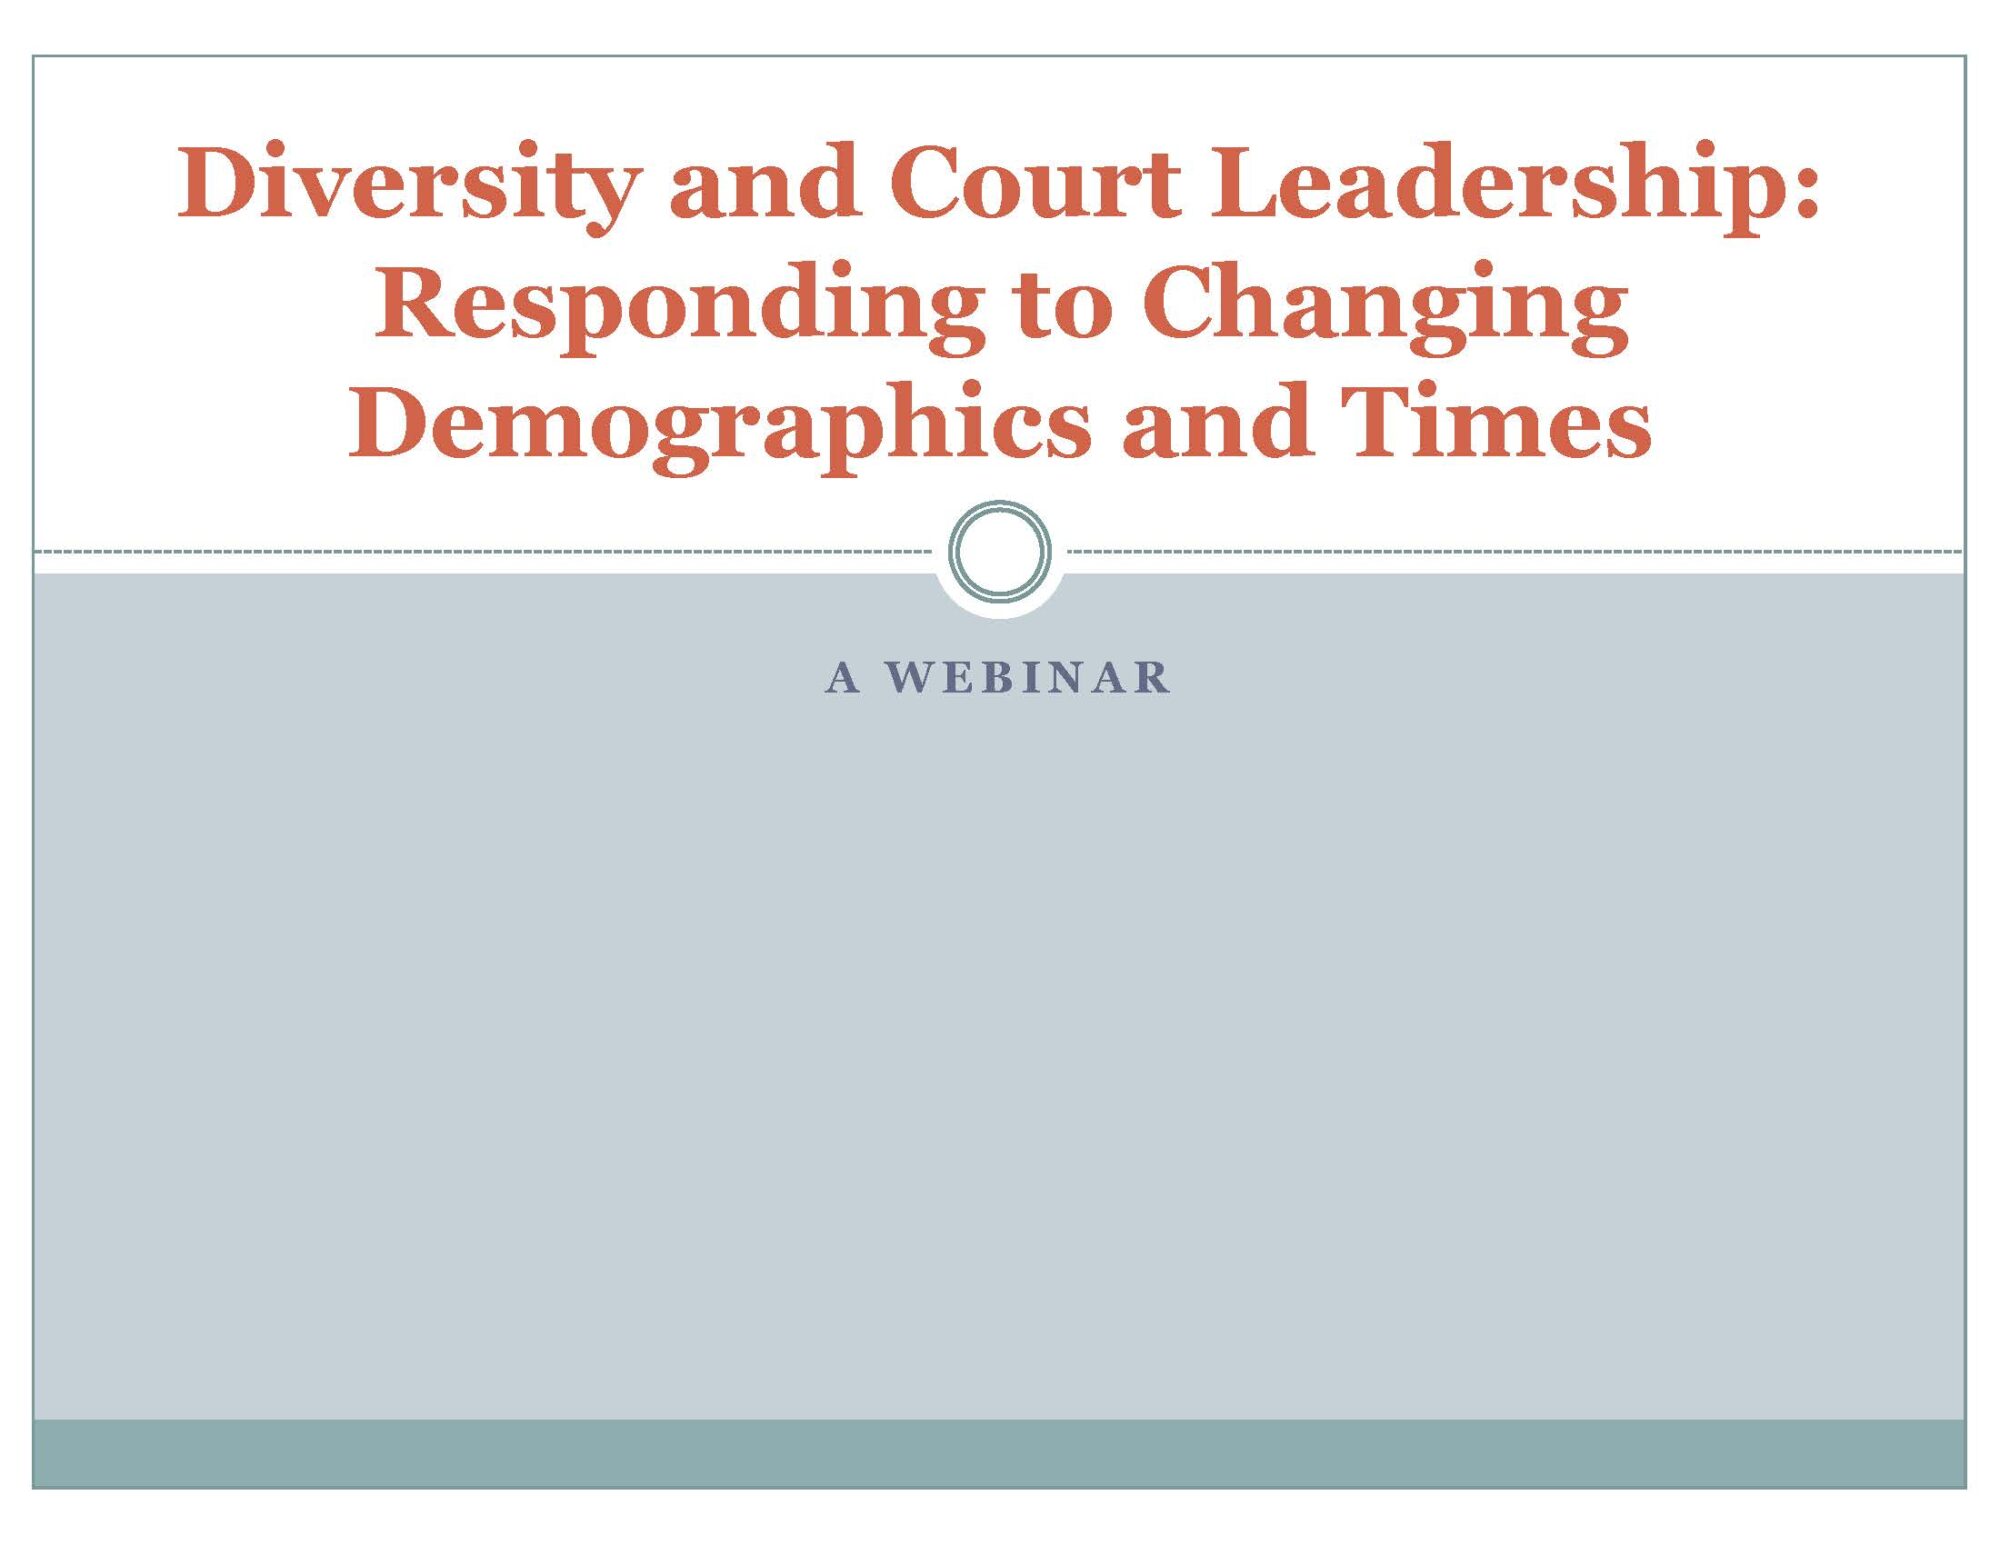 Diversity and Court Leadership II